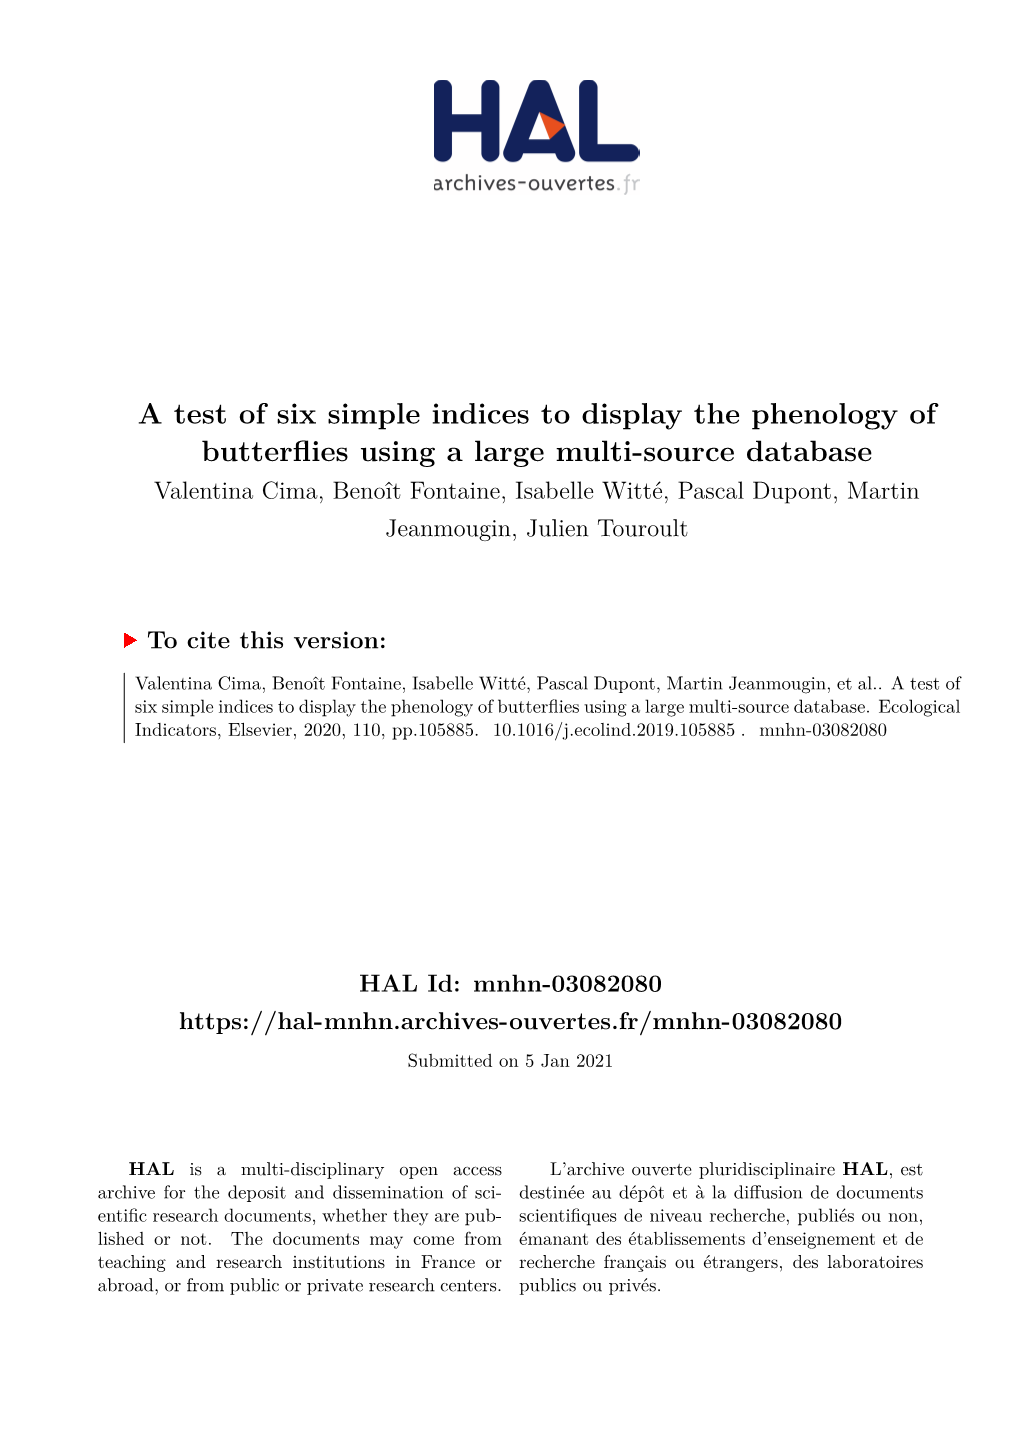 A Test of Six Simple Indices to Display the Phenology of Butterflies Using A